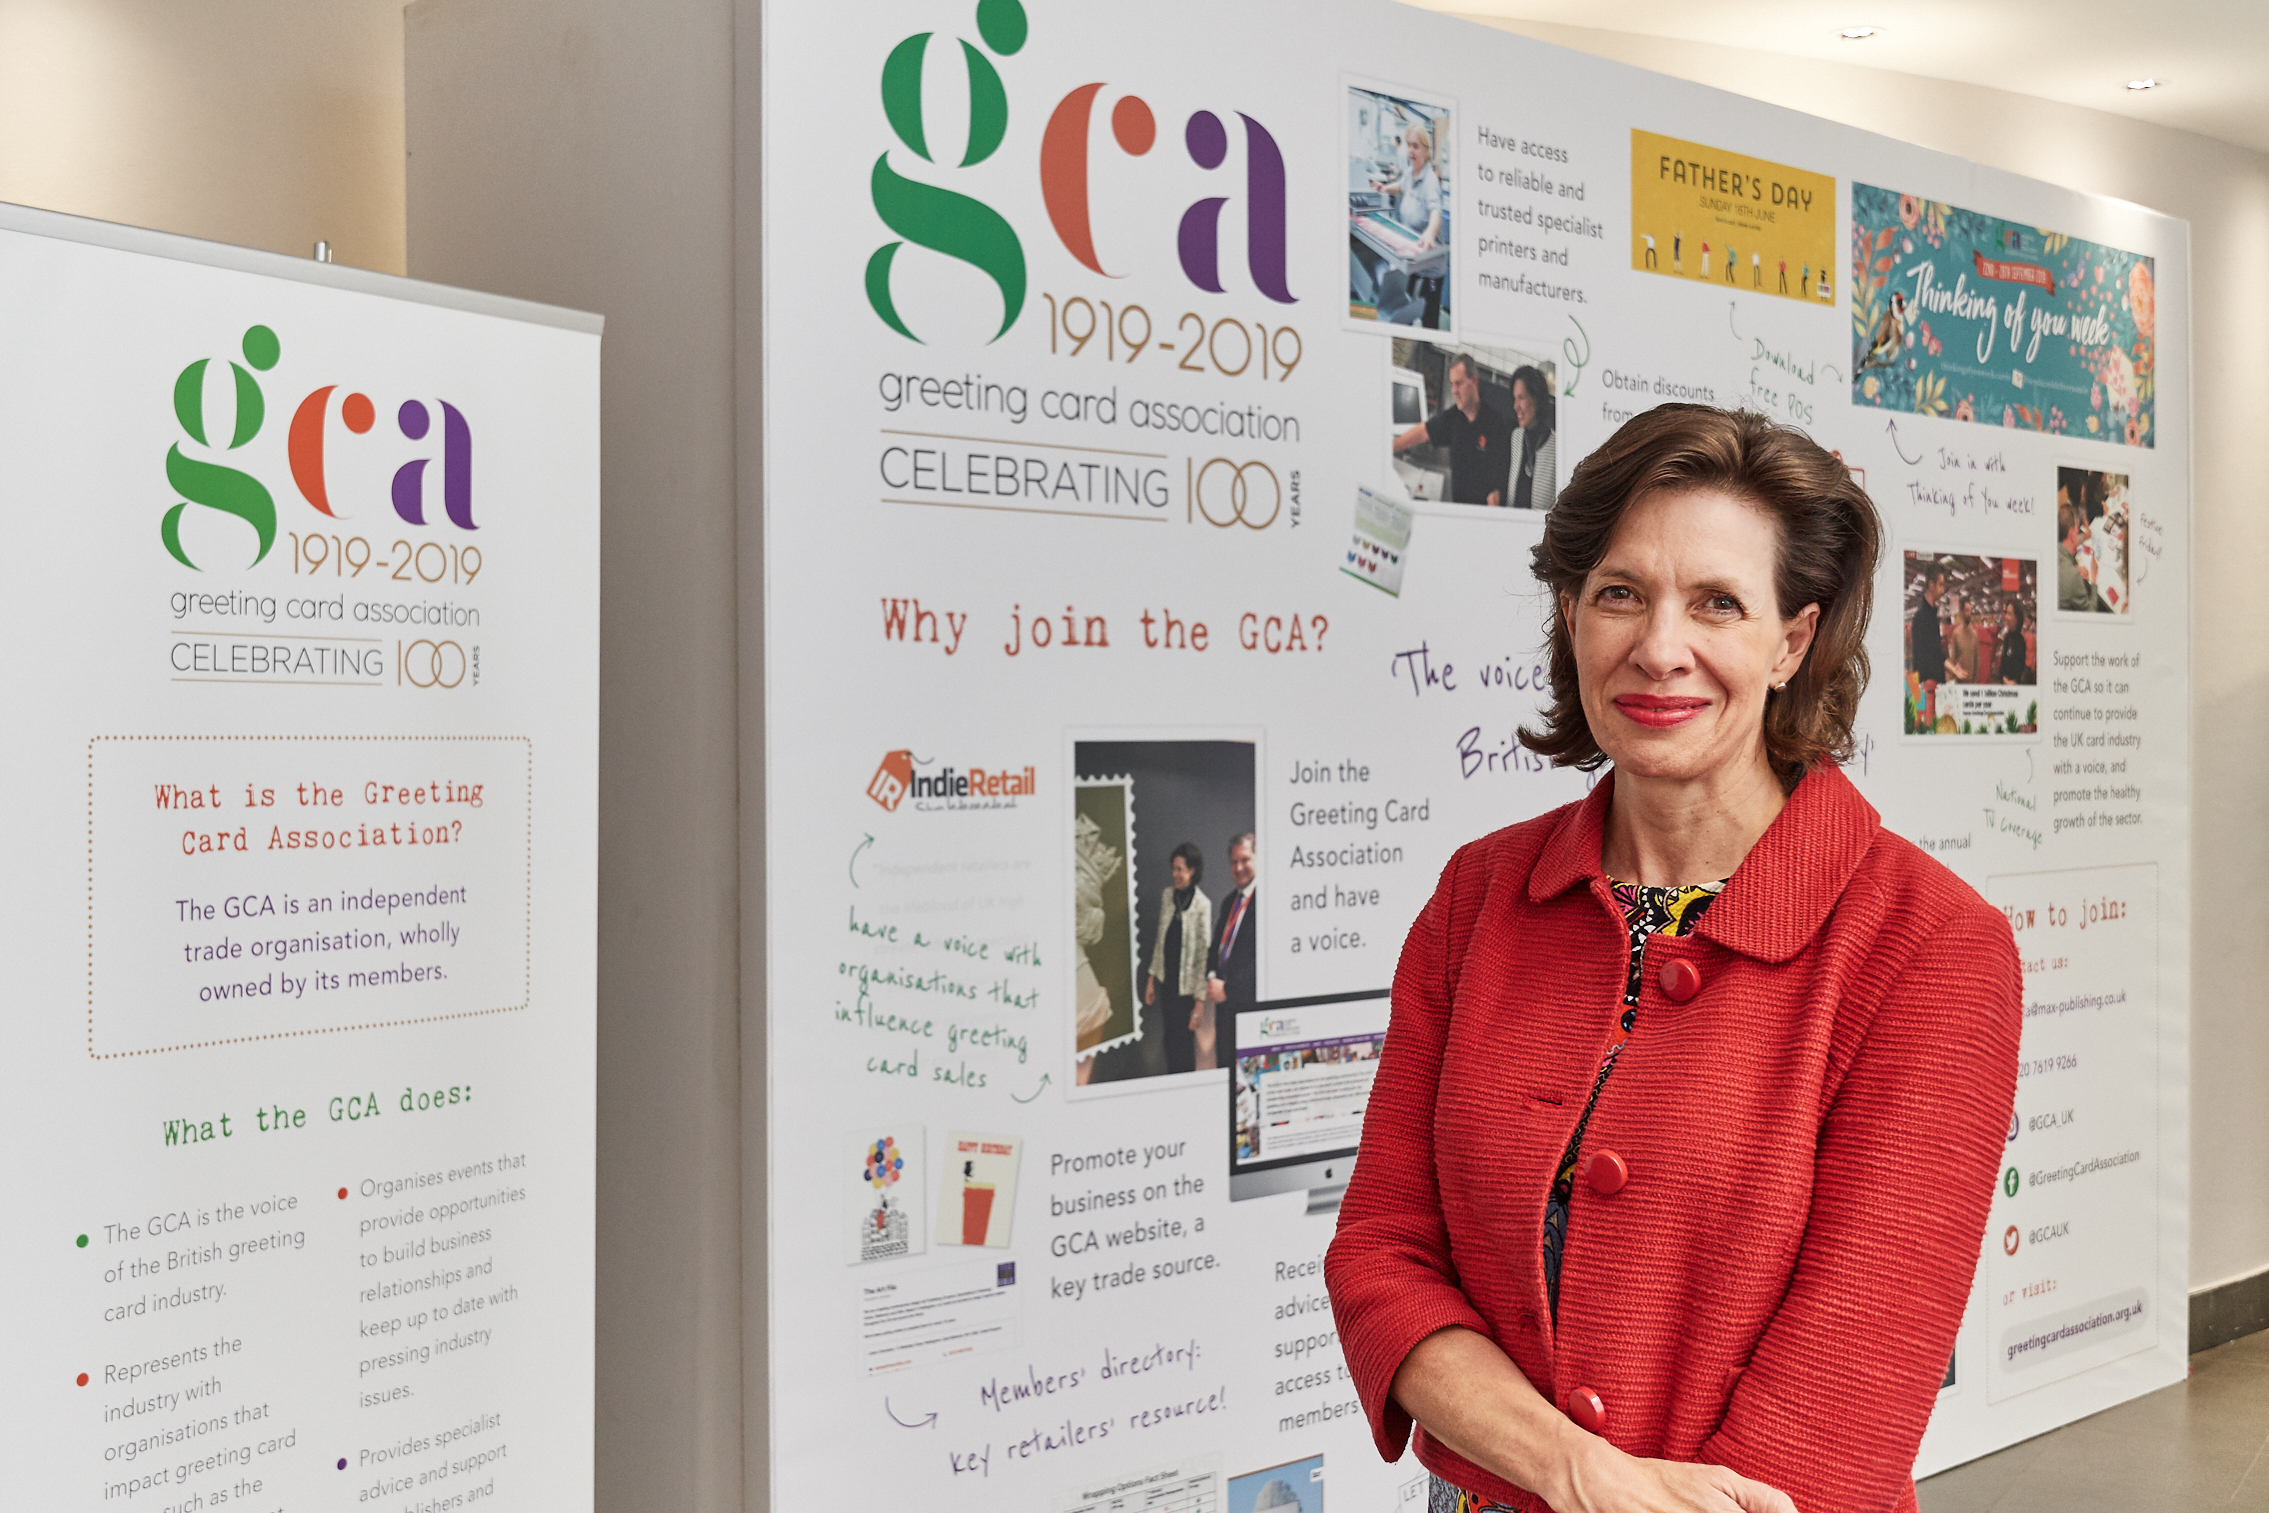 Above: Being driven by Amanda Fergusson, ceo of the GCA, the #cardtokeep Instagram initiative is part of the Association’s 100 anniversary activities.